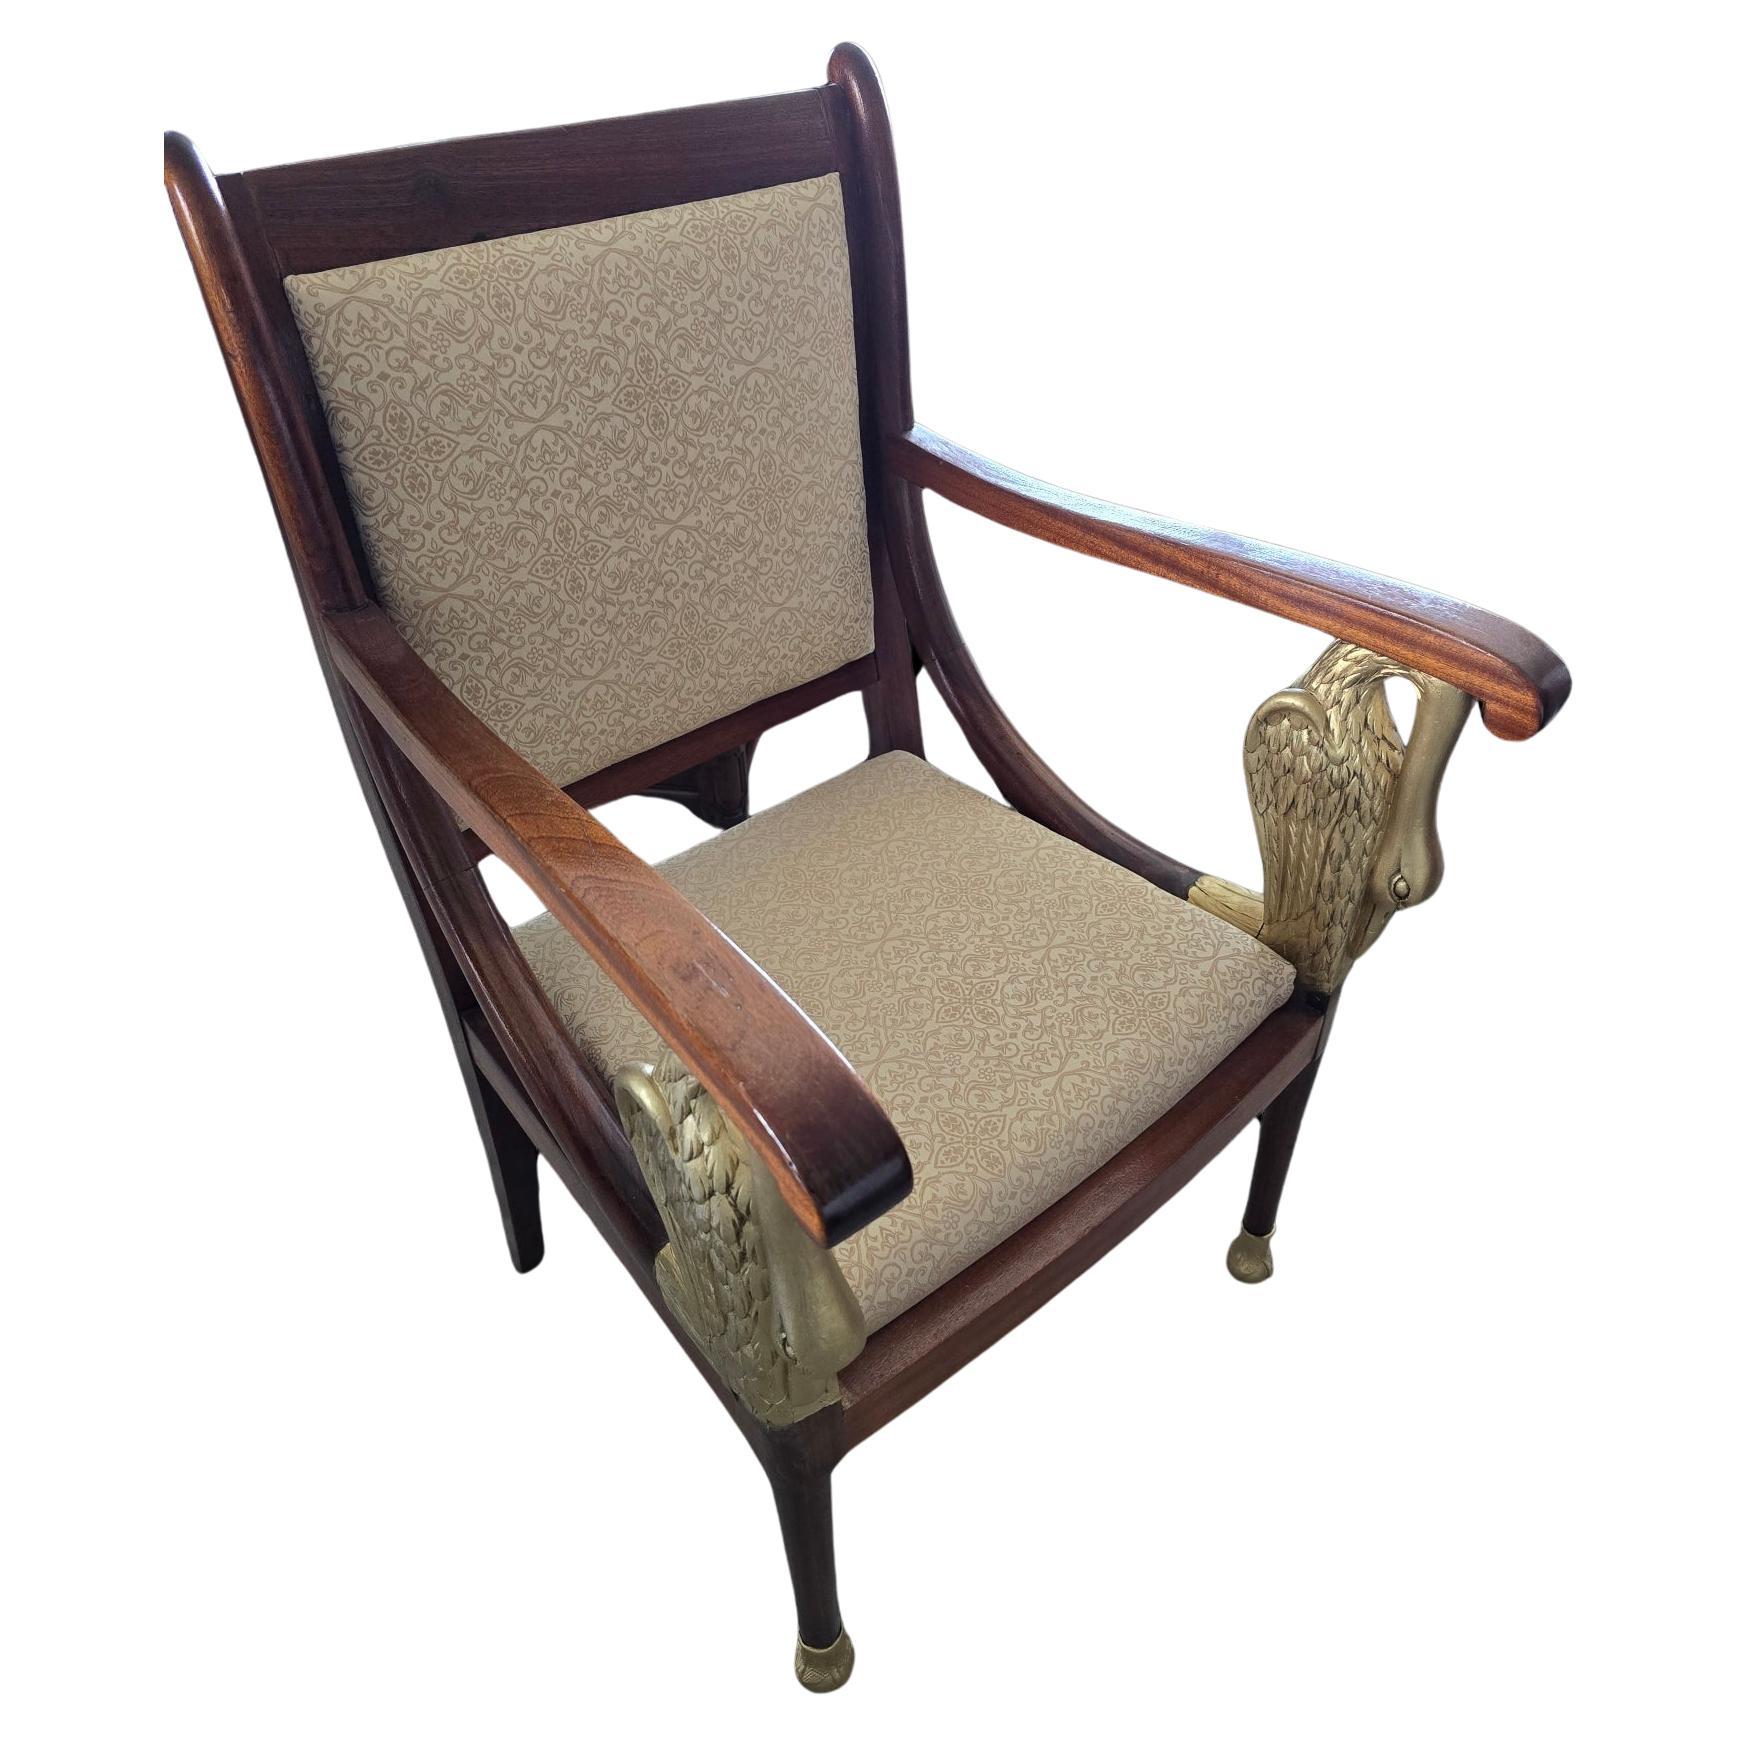 Empire Revival Chairs